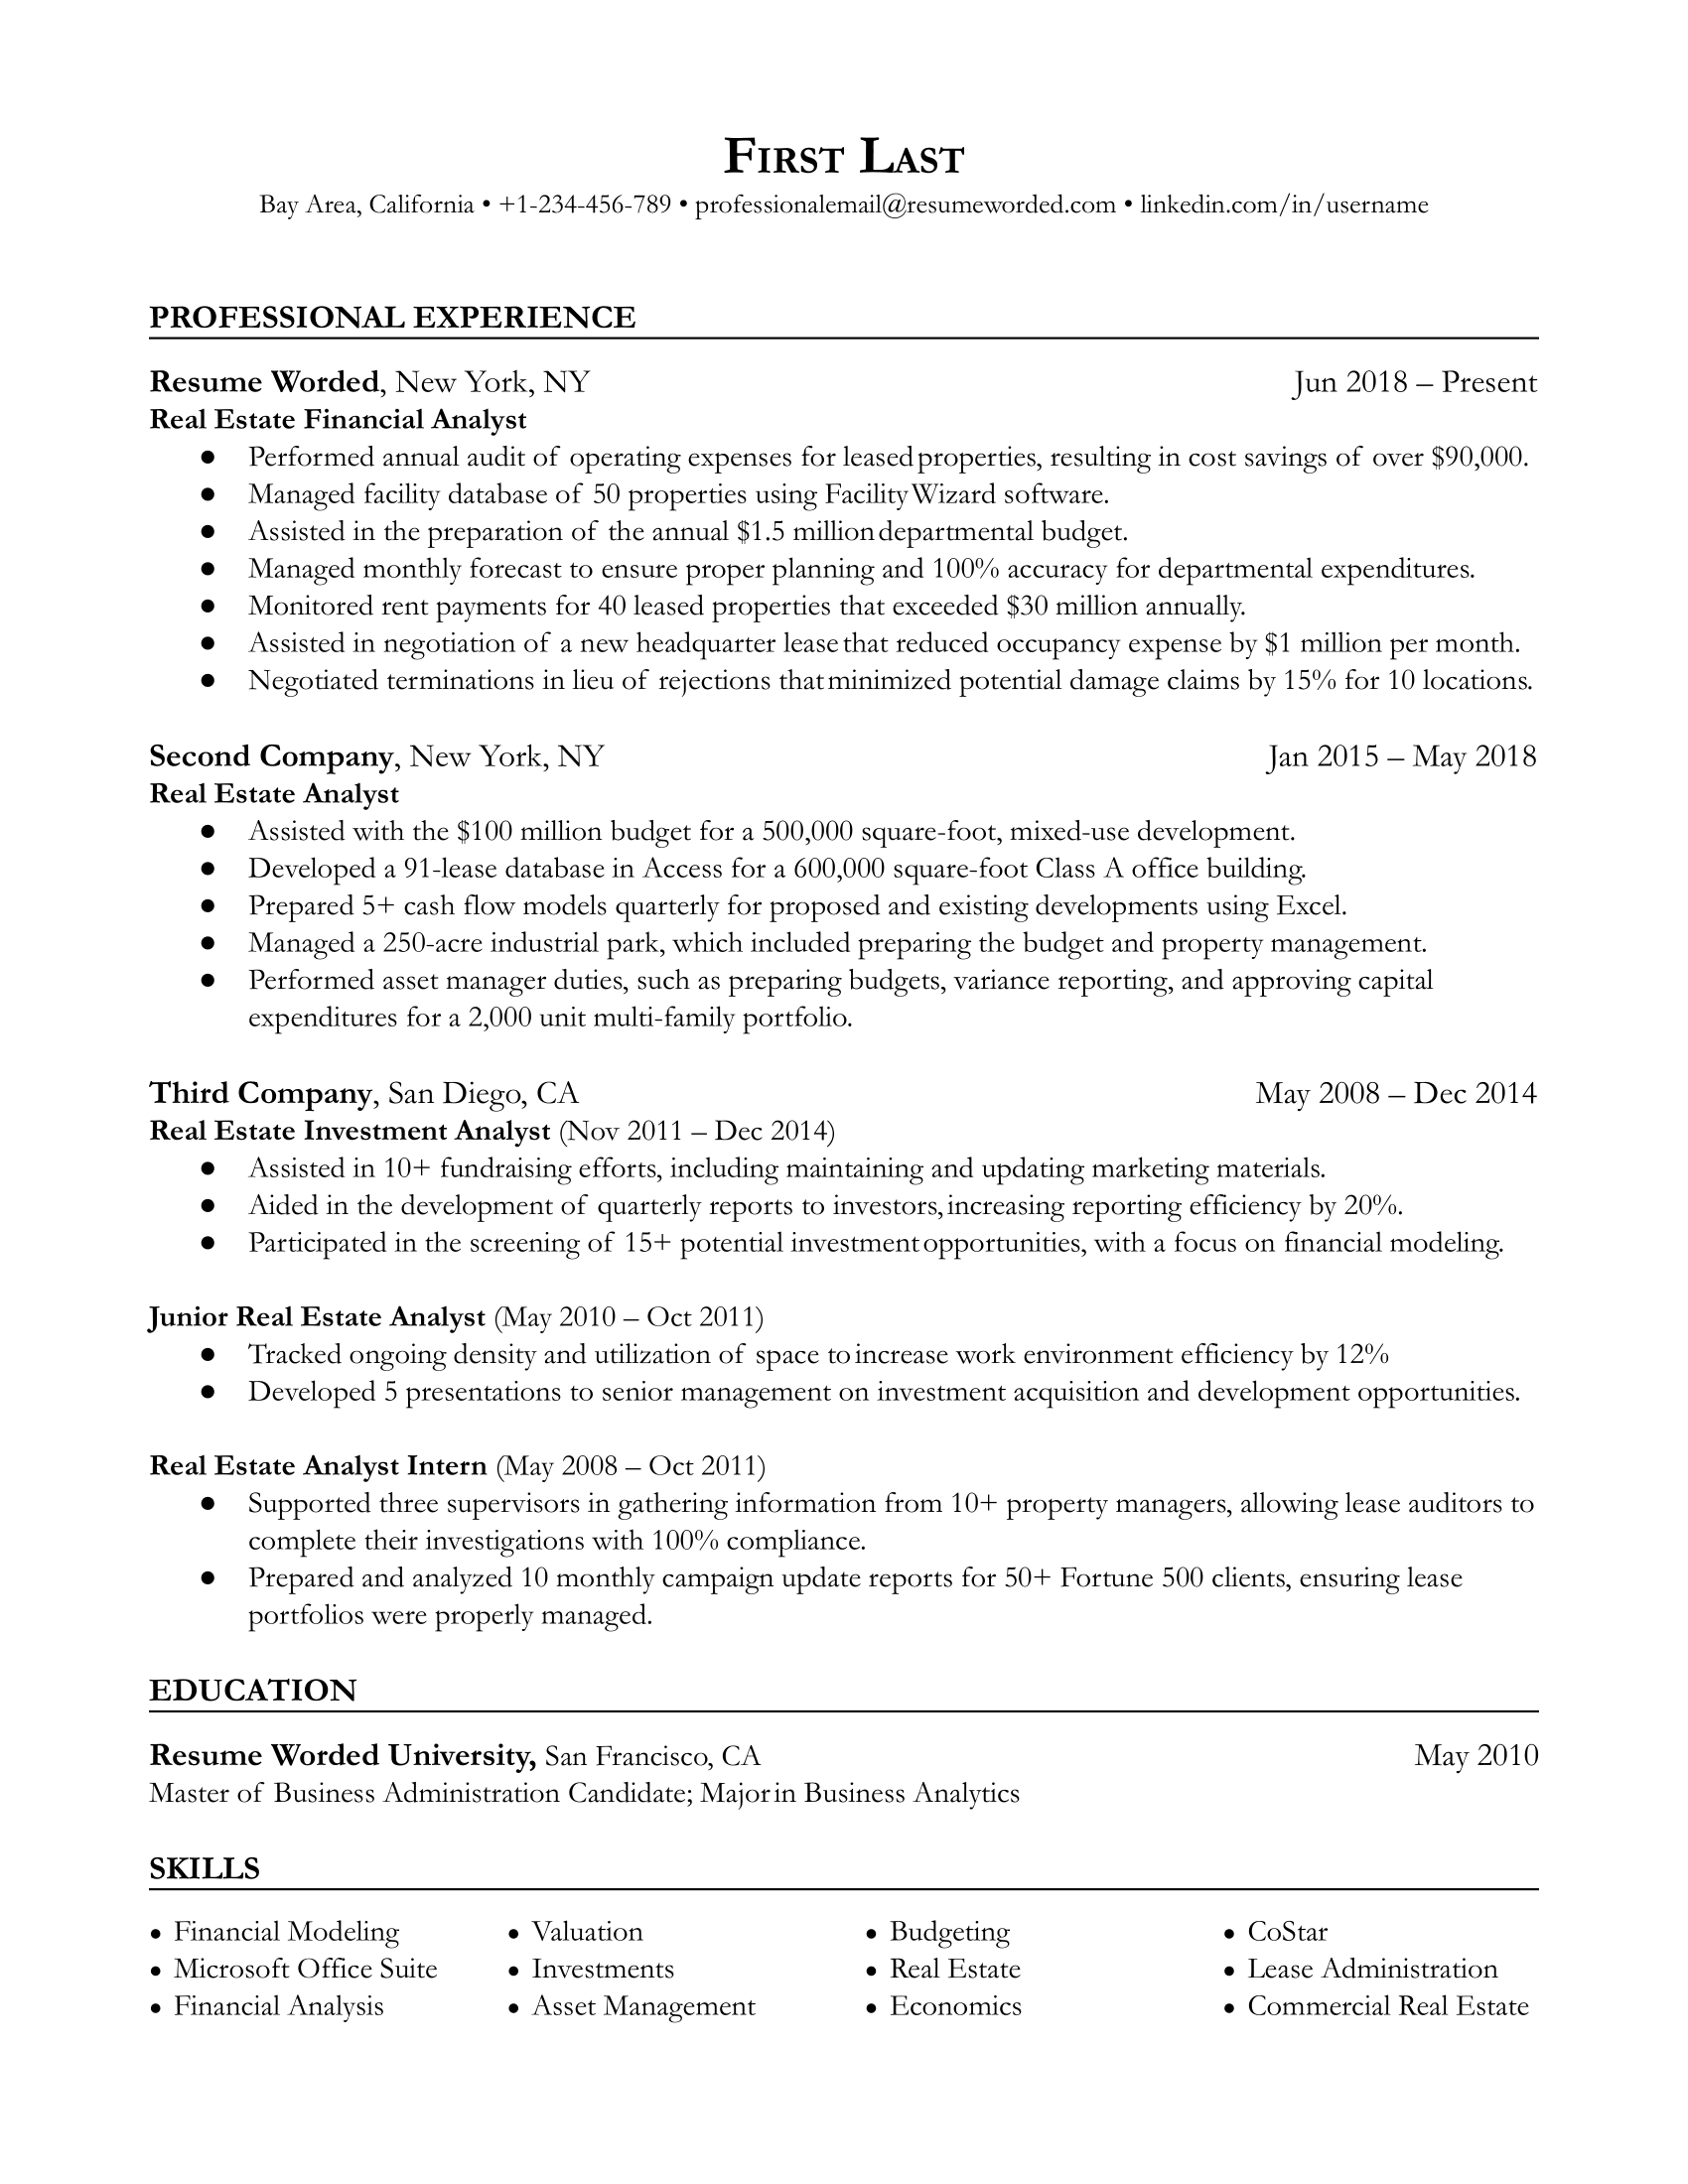 Real Estate Financial Analyst Resume Sample